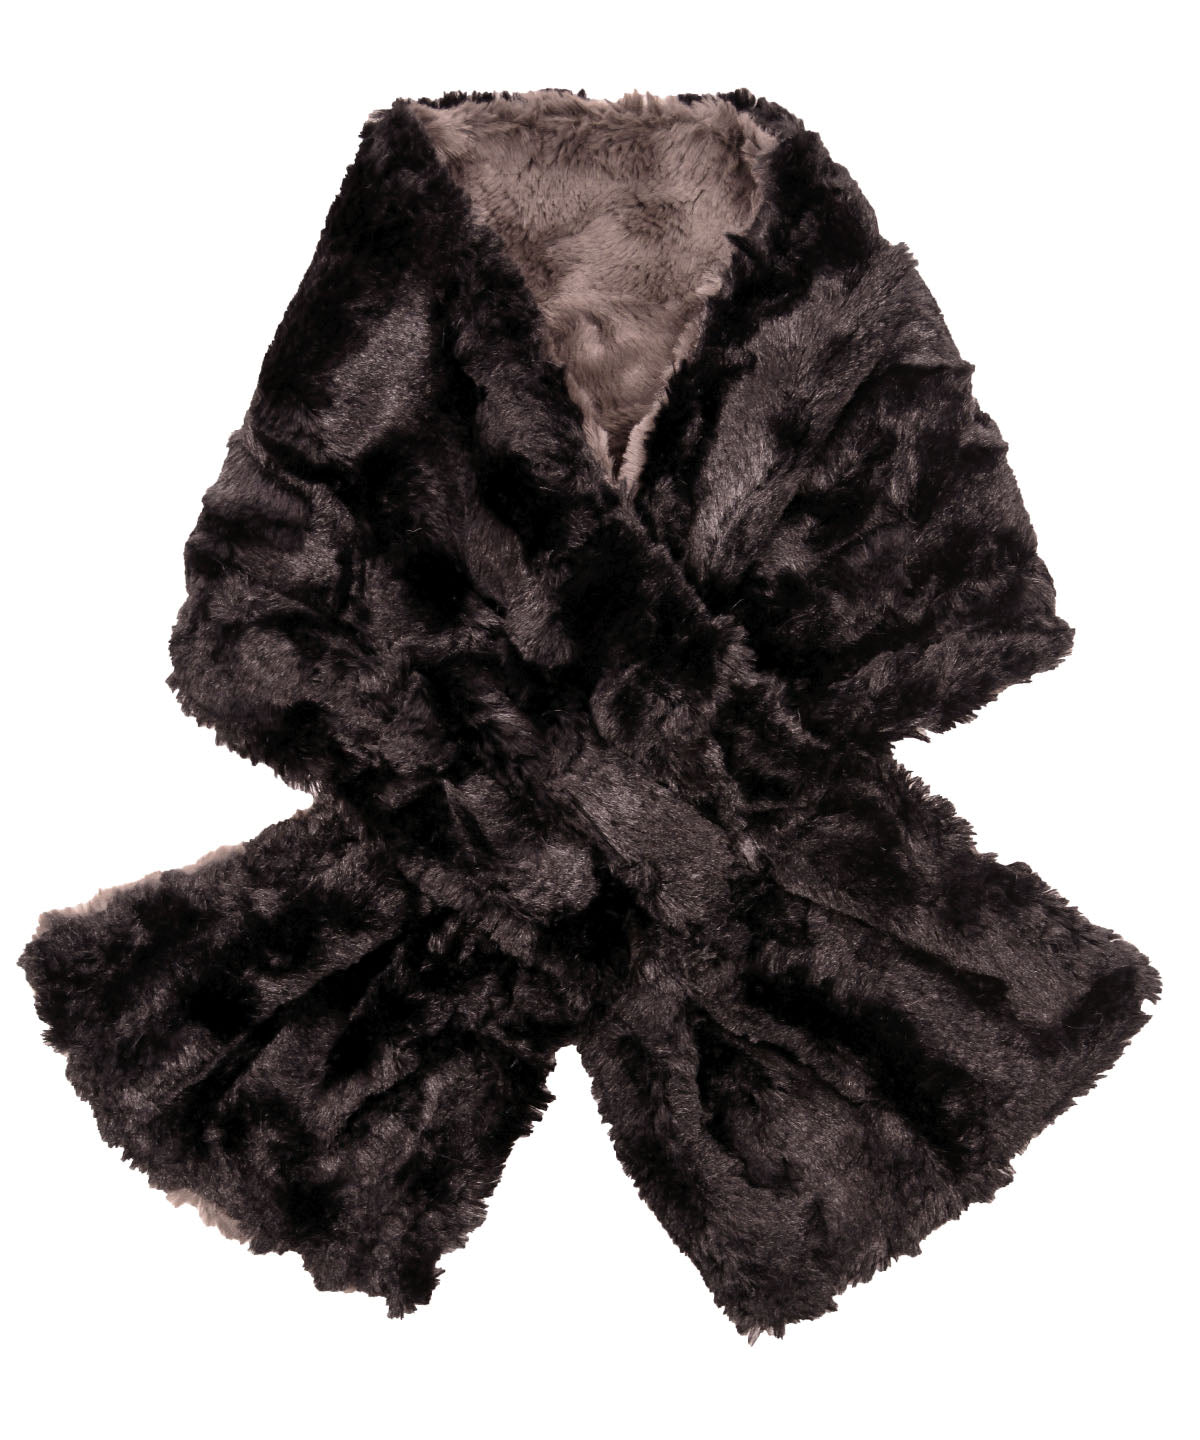 Pull Through Scarf Cuddly Faux Fur in Gray with Black - Reversed